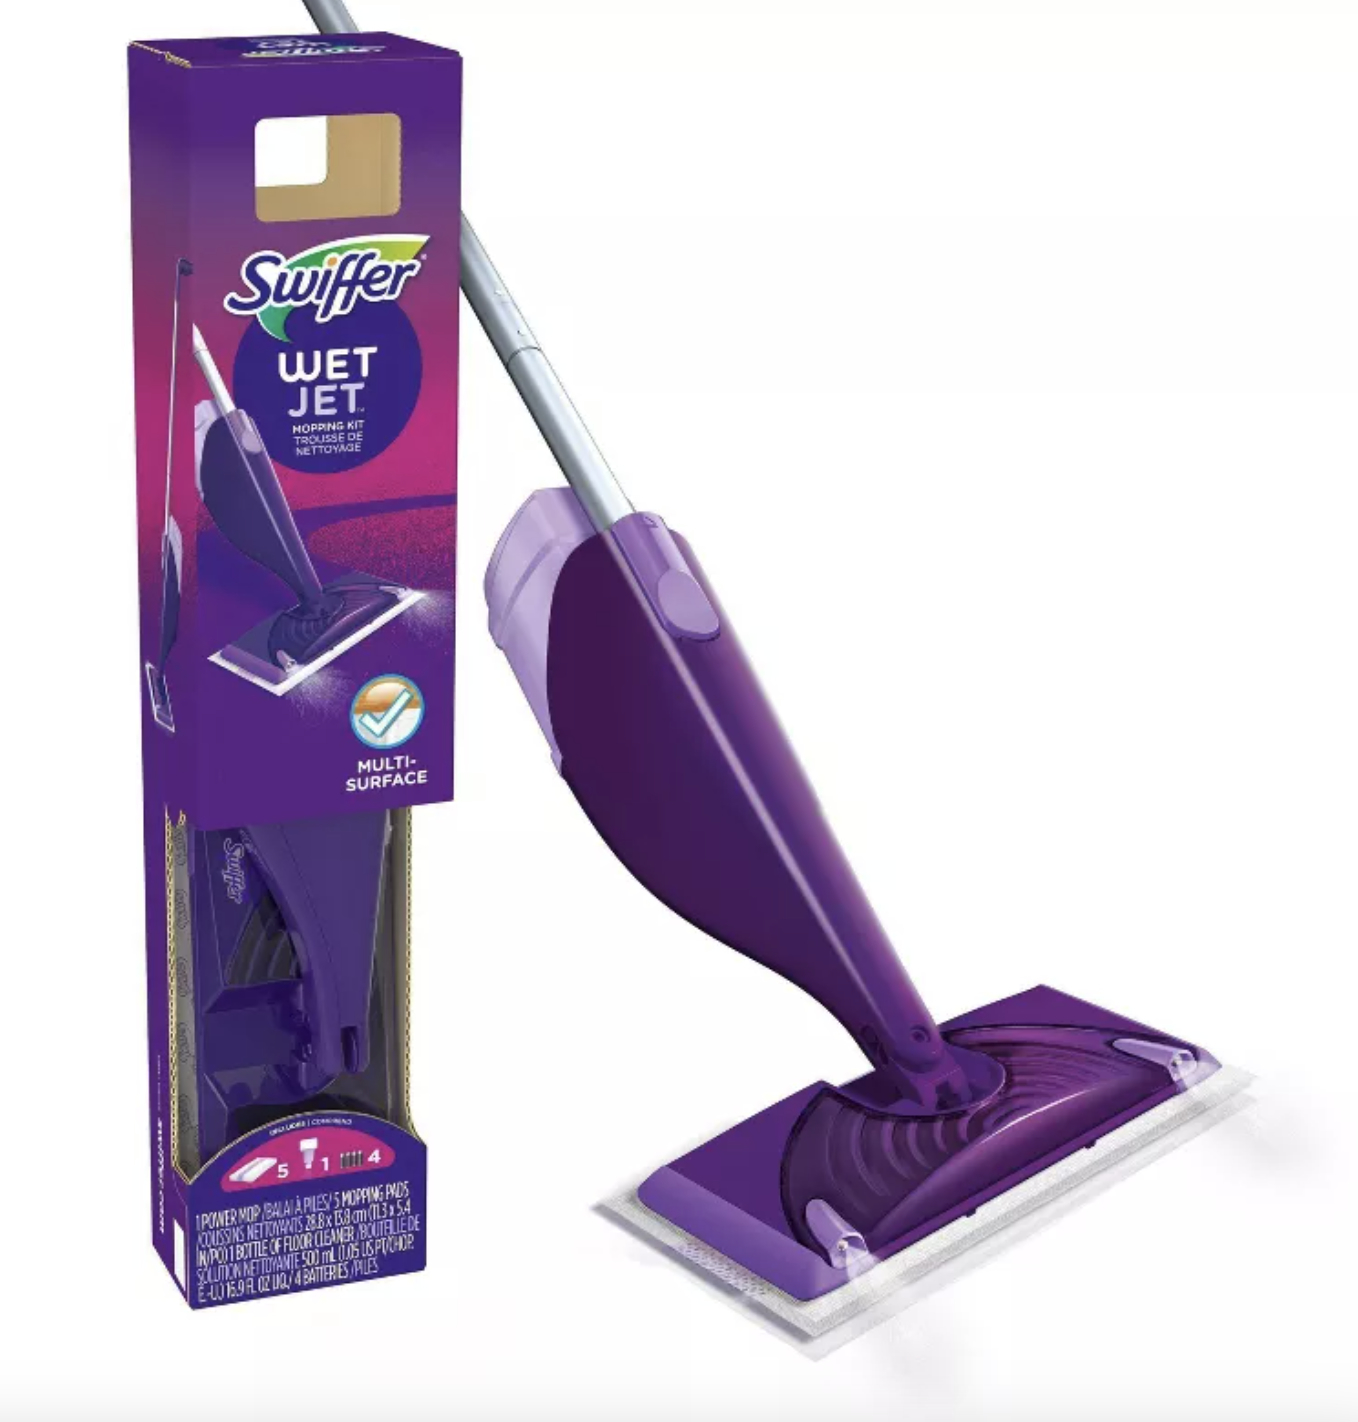 A Swiffer wet jet with its packaging